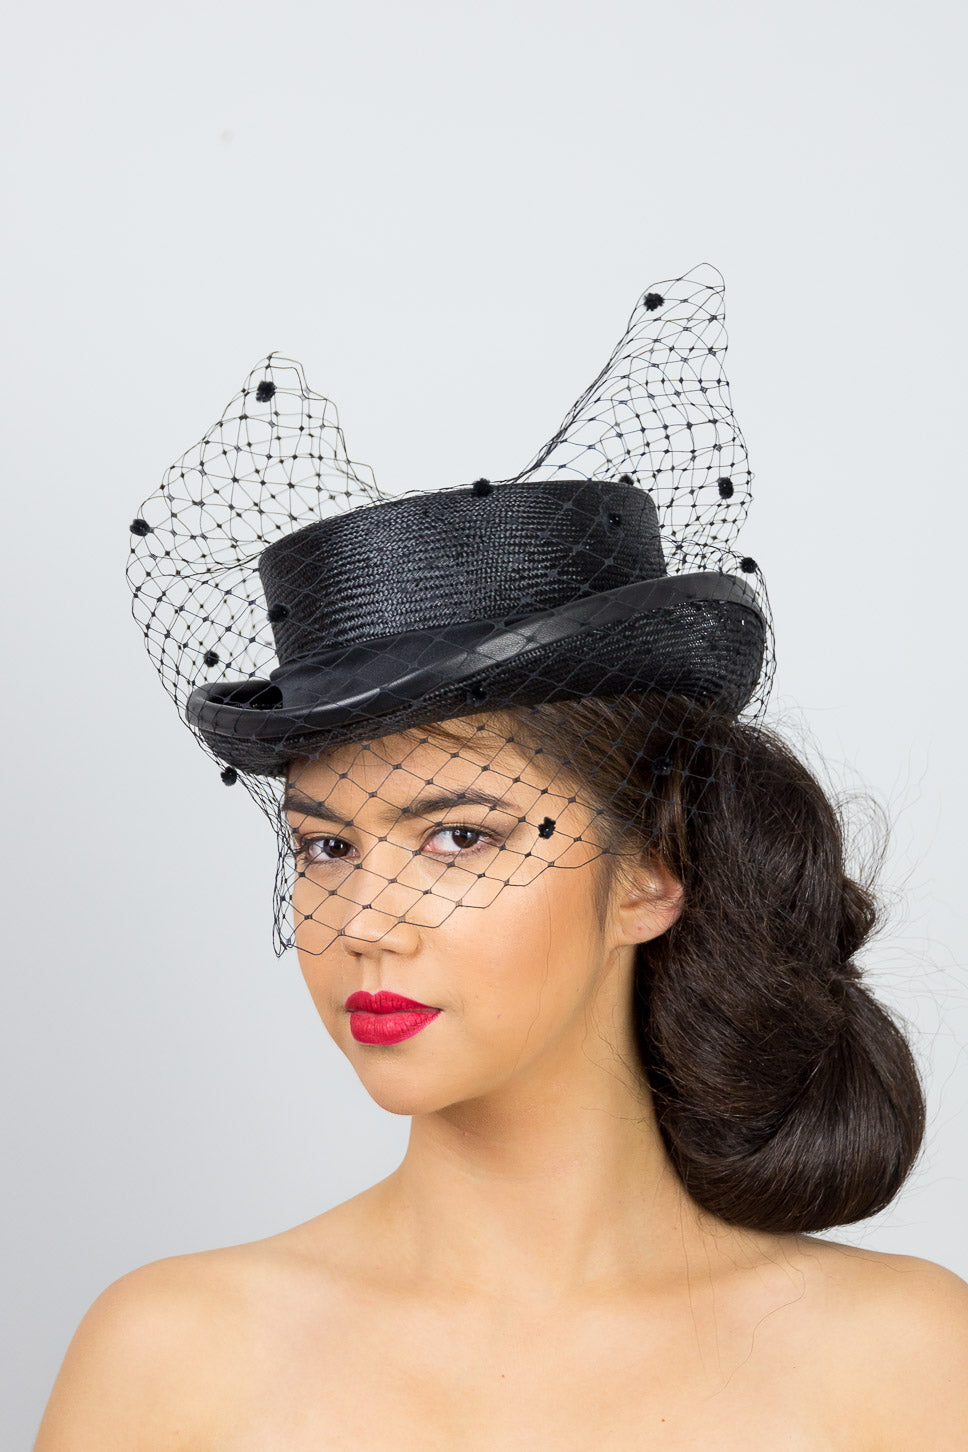 ISABELLA-Black short top hat with veiling and tie